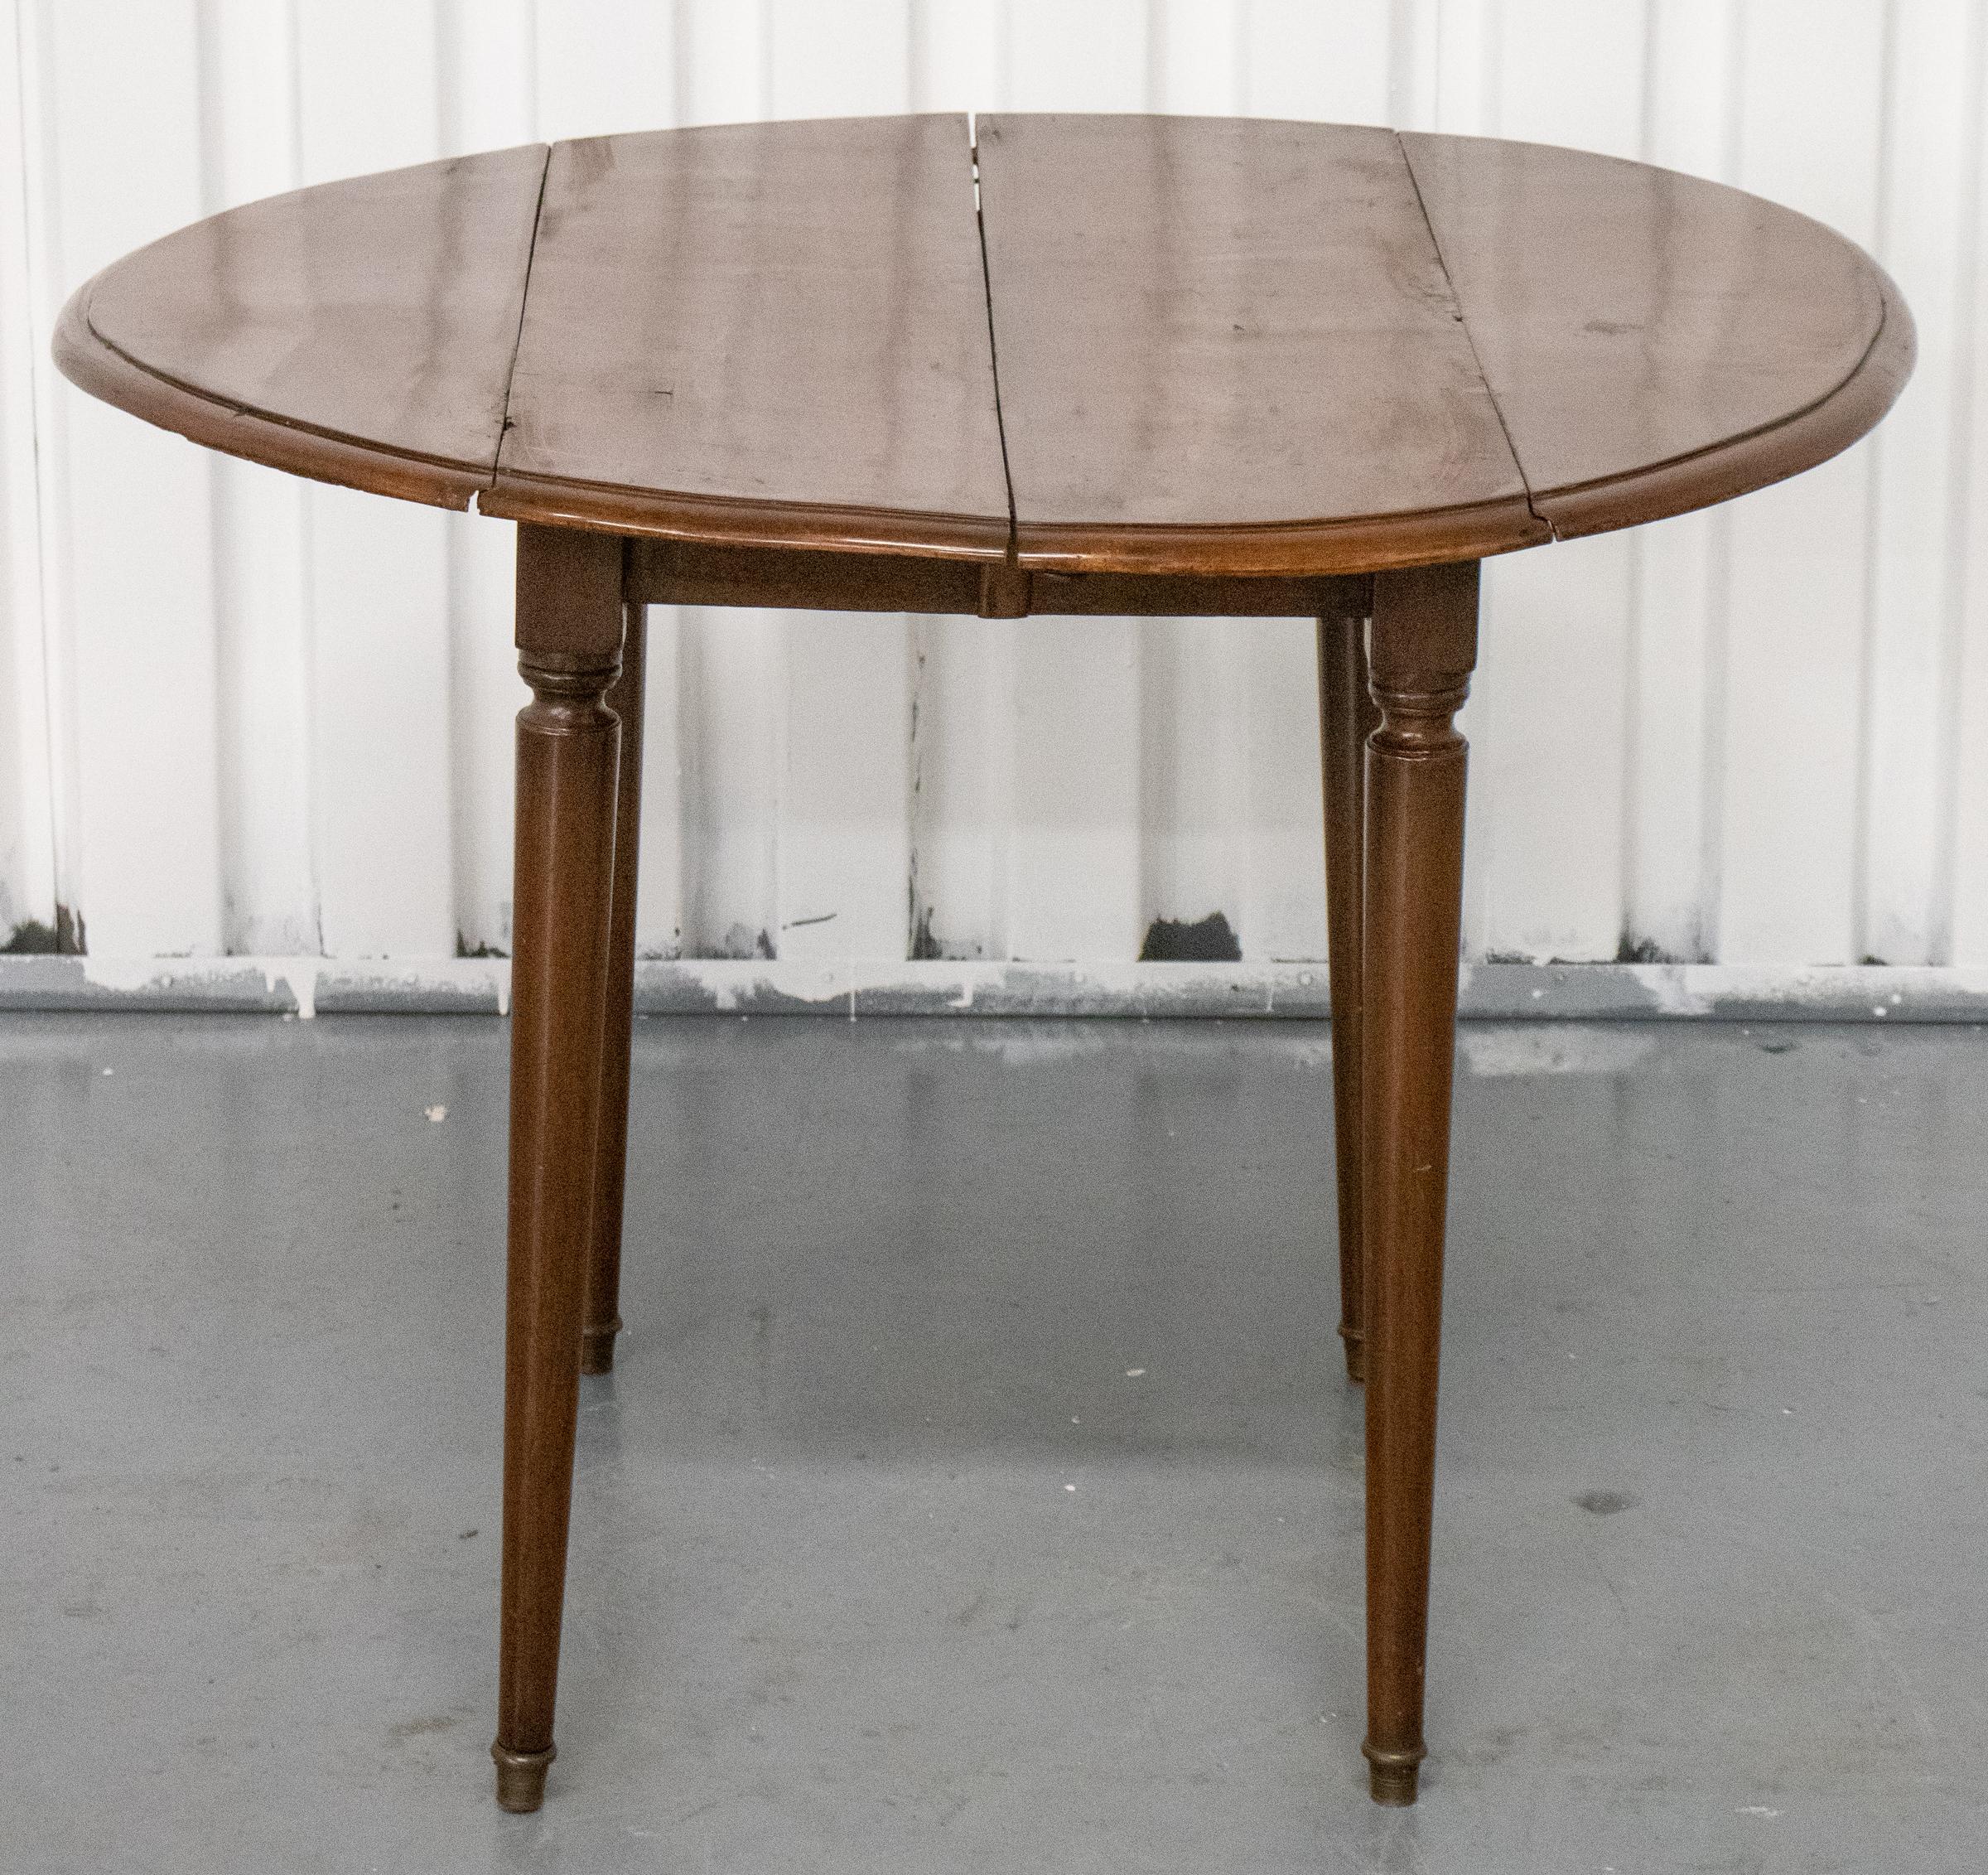 George III Provincial mahogany dining table, circa 1800, the top with two D-form drop flaps above the tapered column legs raised on brass caps, with three leaves. Measures: 28” H x 38” W x 20” D, leaves 13